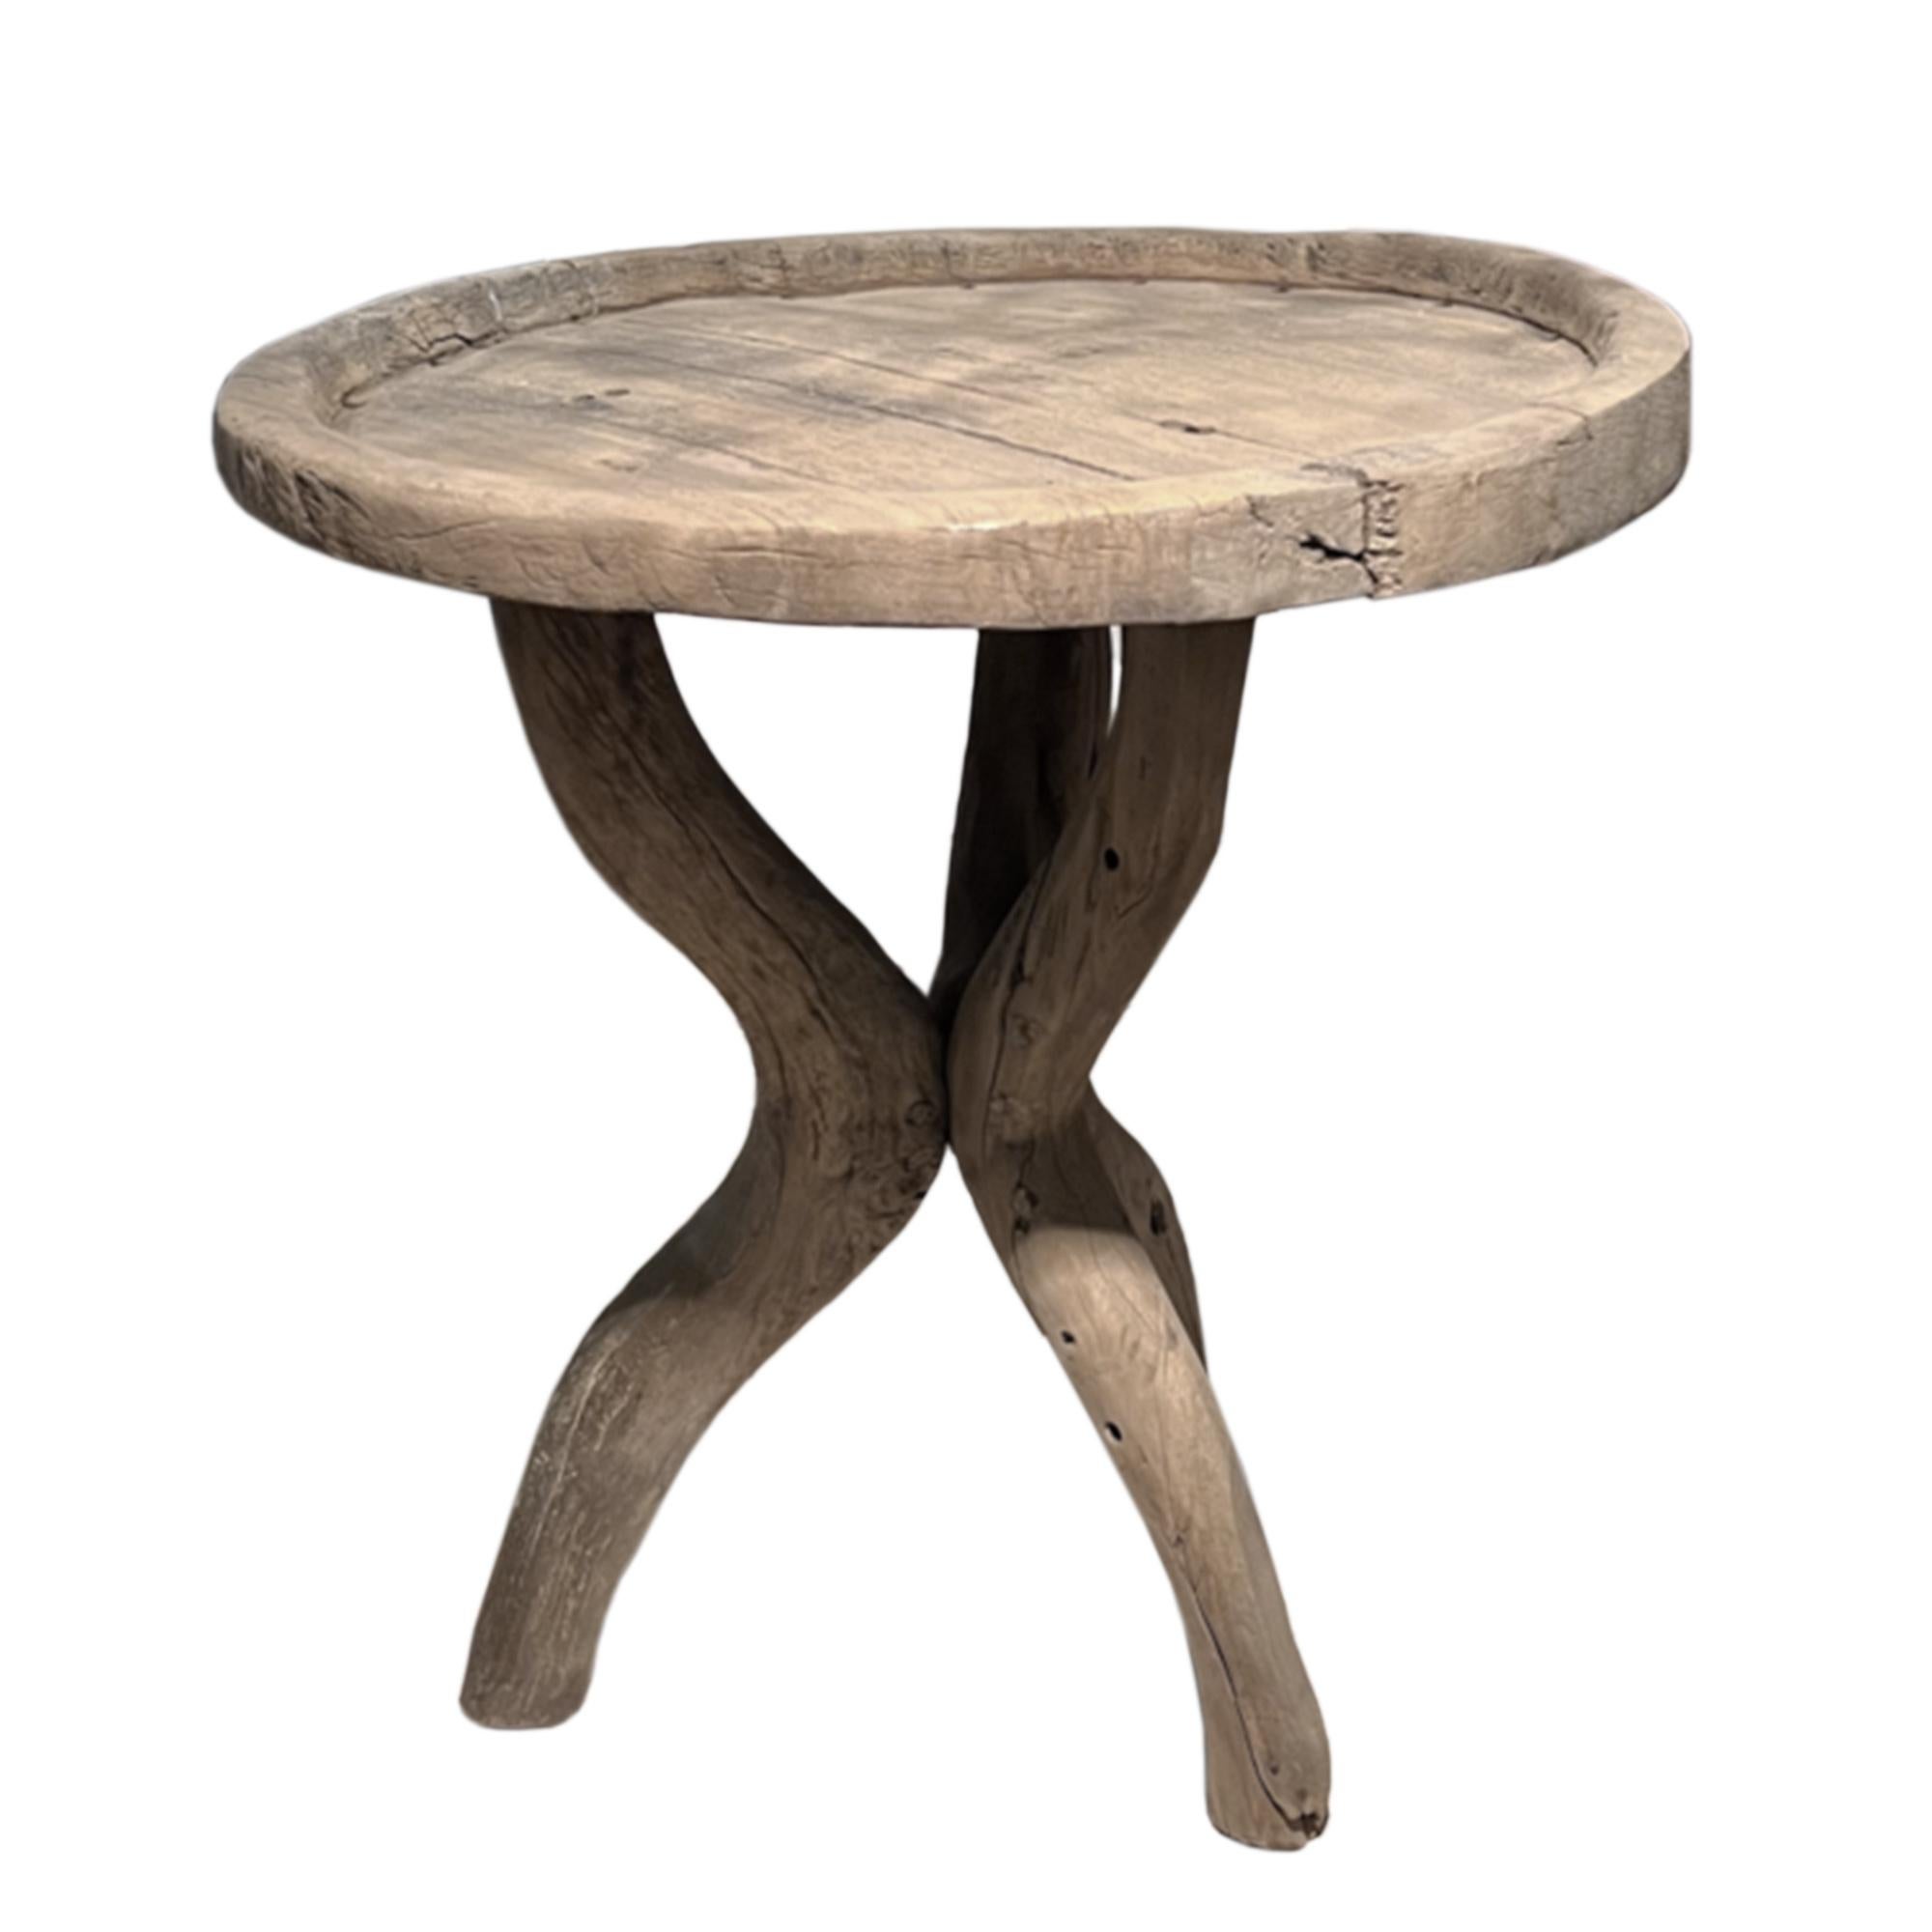 This is a really unusual side table. Three driftwood legs support the artisan rustic top. 

Decorative, but sturdy. Very tactile.

A perfect piece for a seaside retreat or a country cottage. 

A unique English antique! 